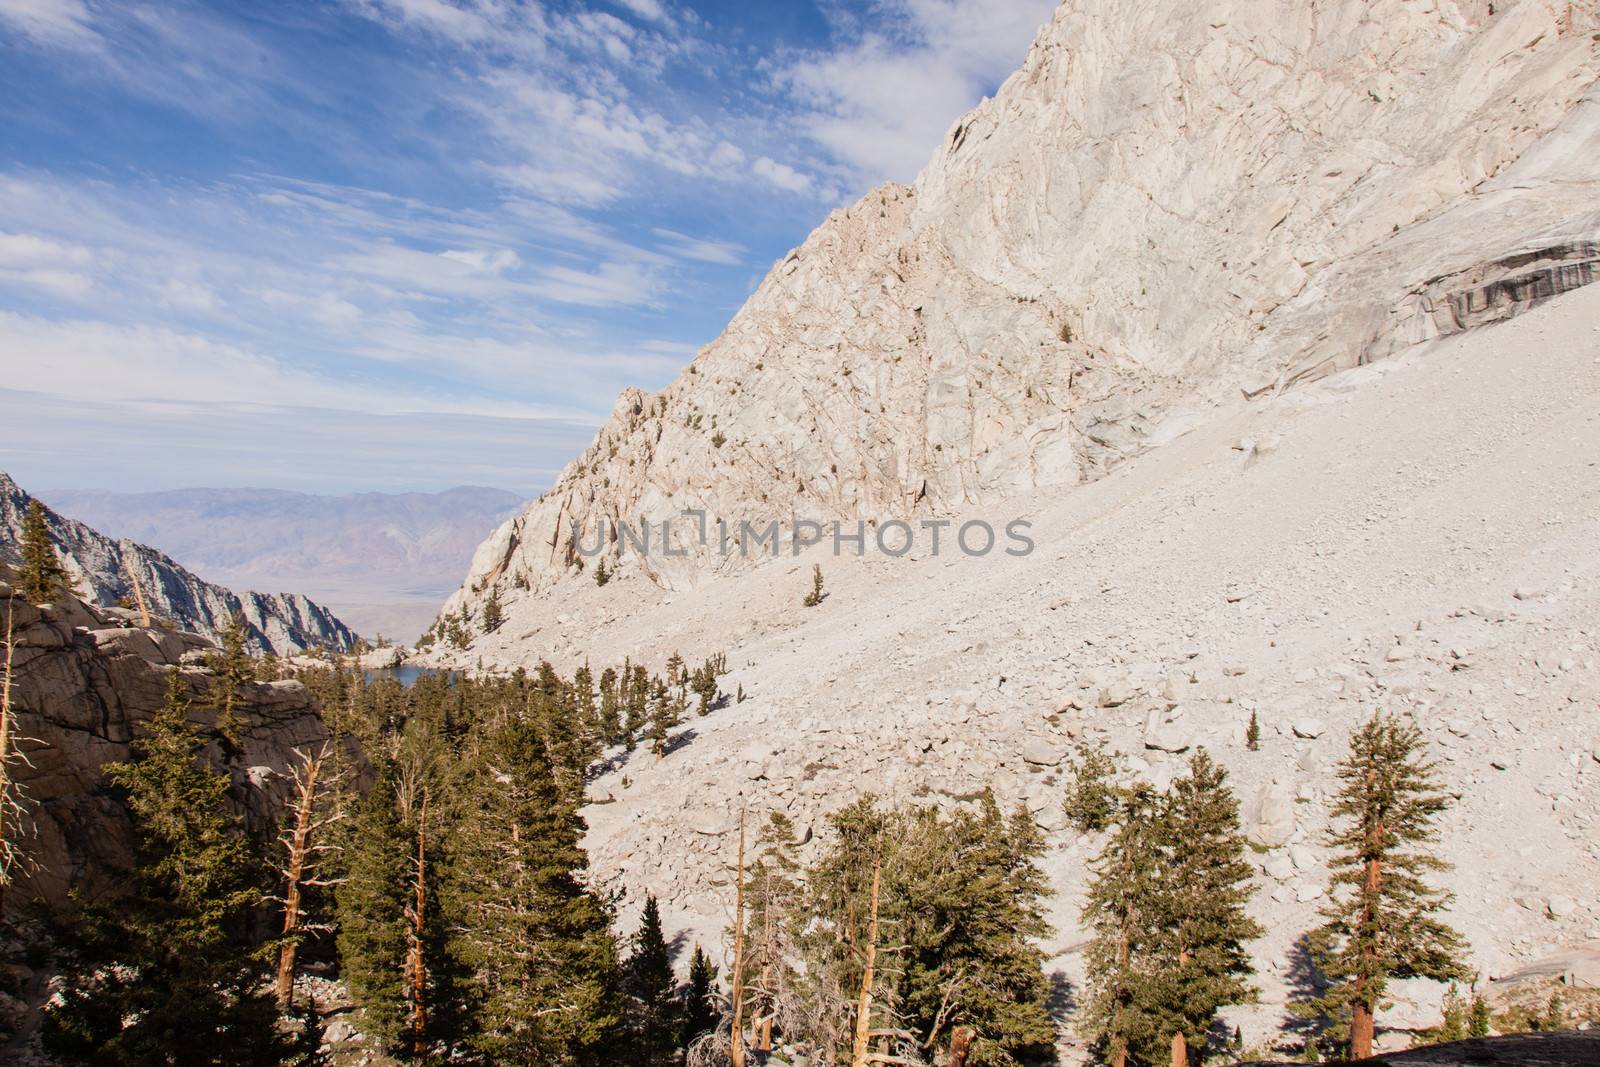 Mt Whitney Trail by melastmohican